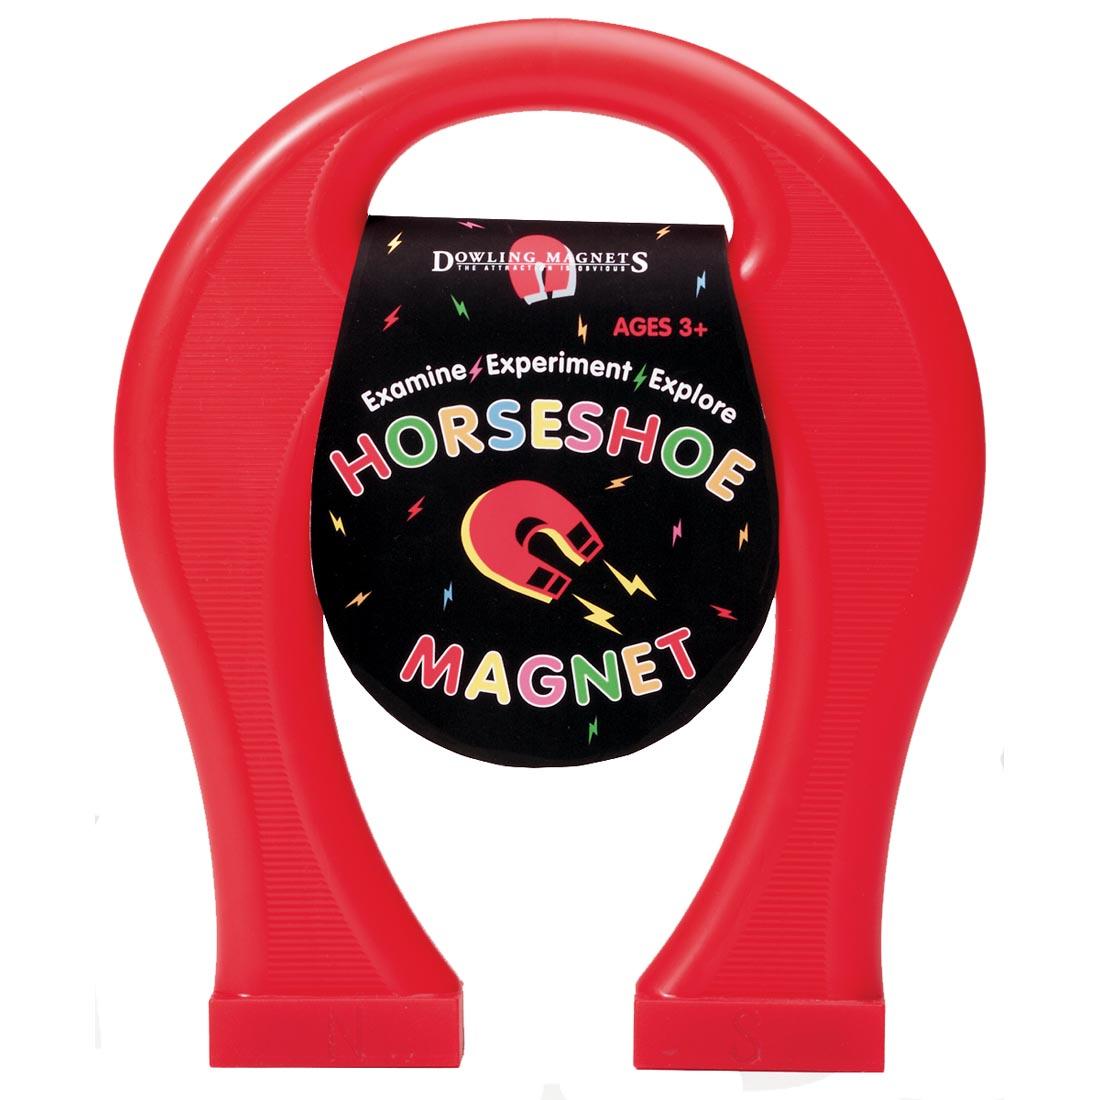 Giant Horseshoe Magnet by Dowling Magnets